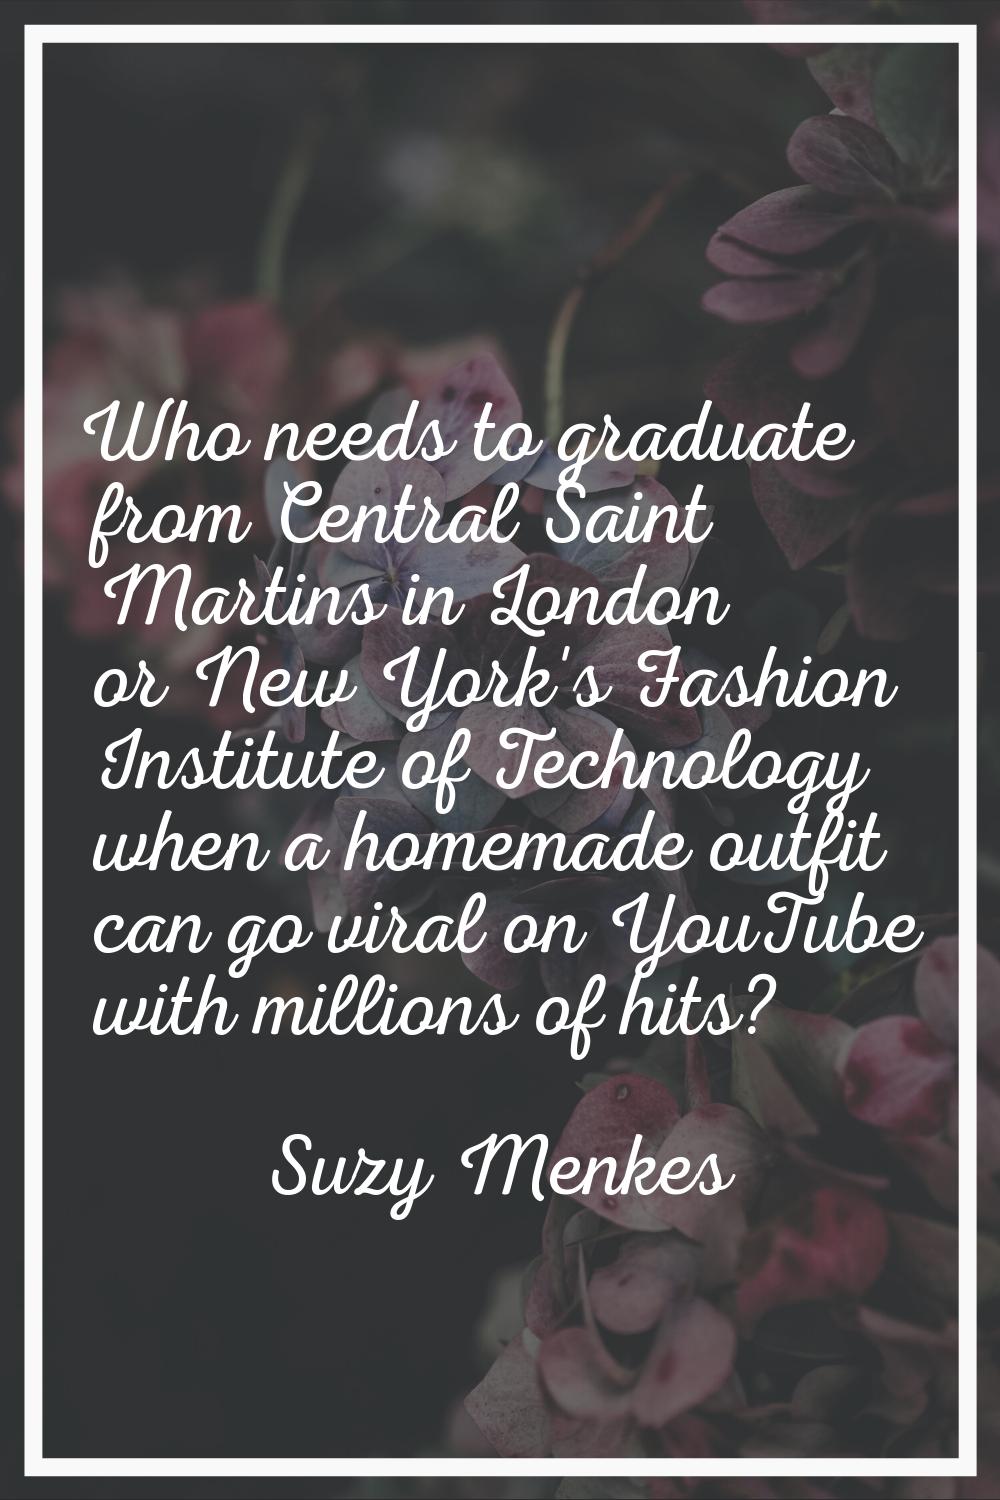 Who needs to graduate from Central Saint Martins in London or New York's Fashion Institute of Techn